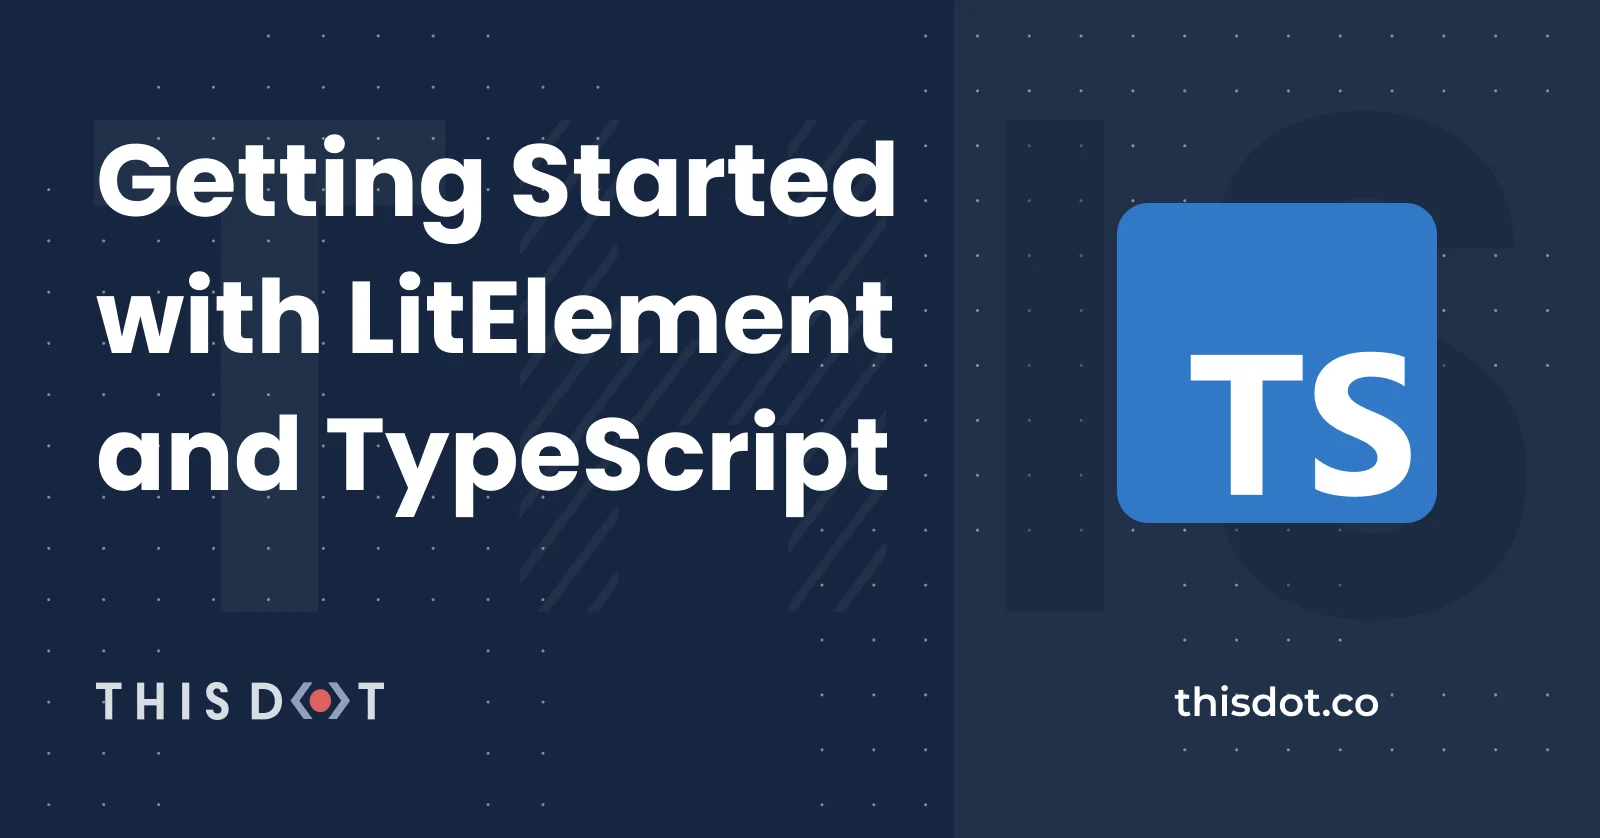 Getting started with LitElement and TypeScript